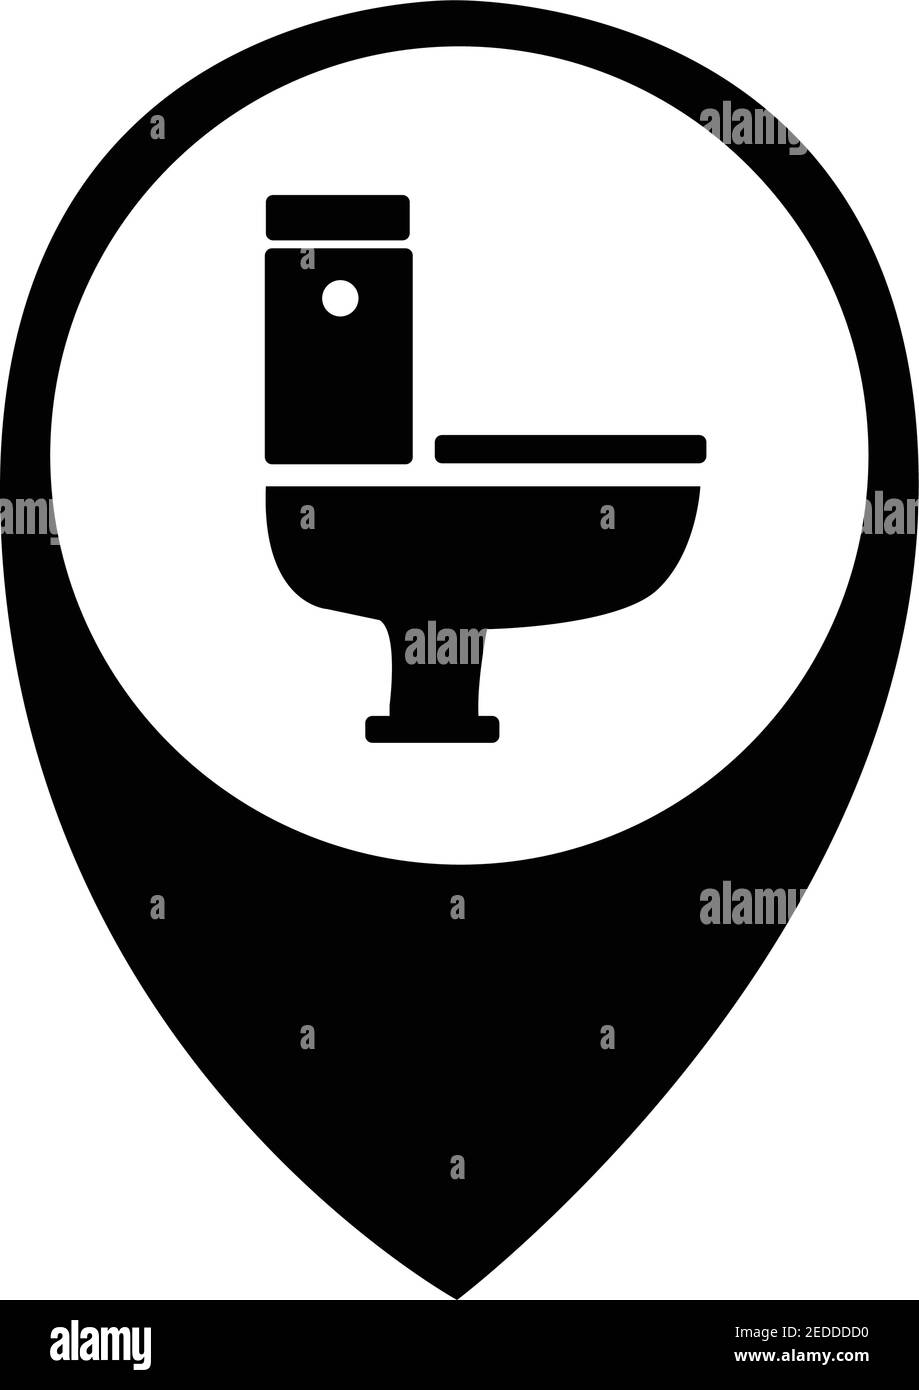 Toilet sign icon pinpoint where is bathroom washroom restroom map element special locations icon with pointed Stock Vector